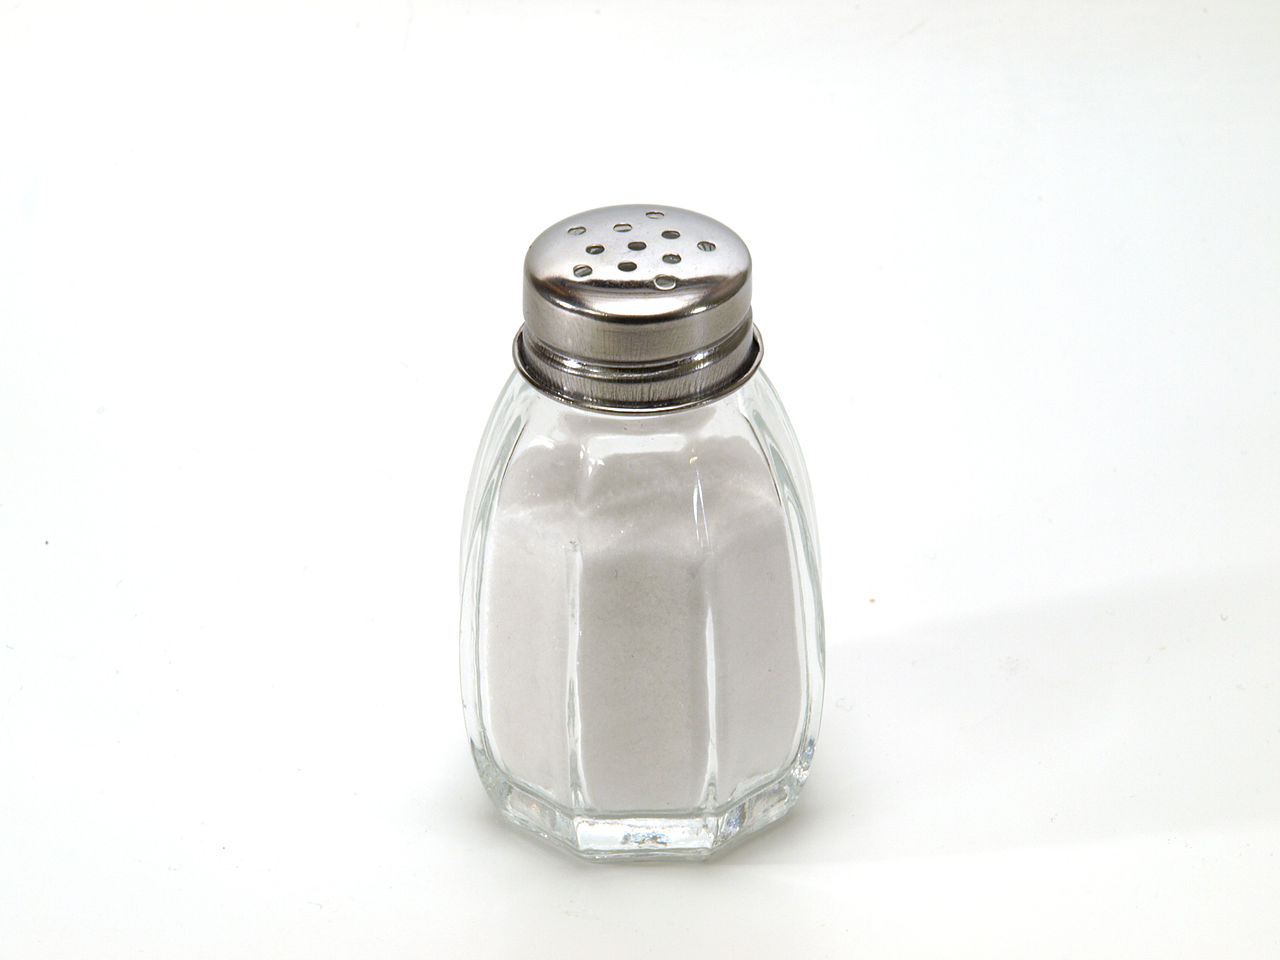 Put Away That Salt Shaker to Shield Your Heart